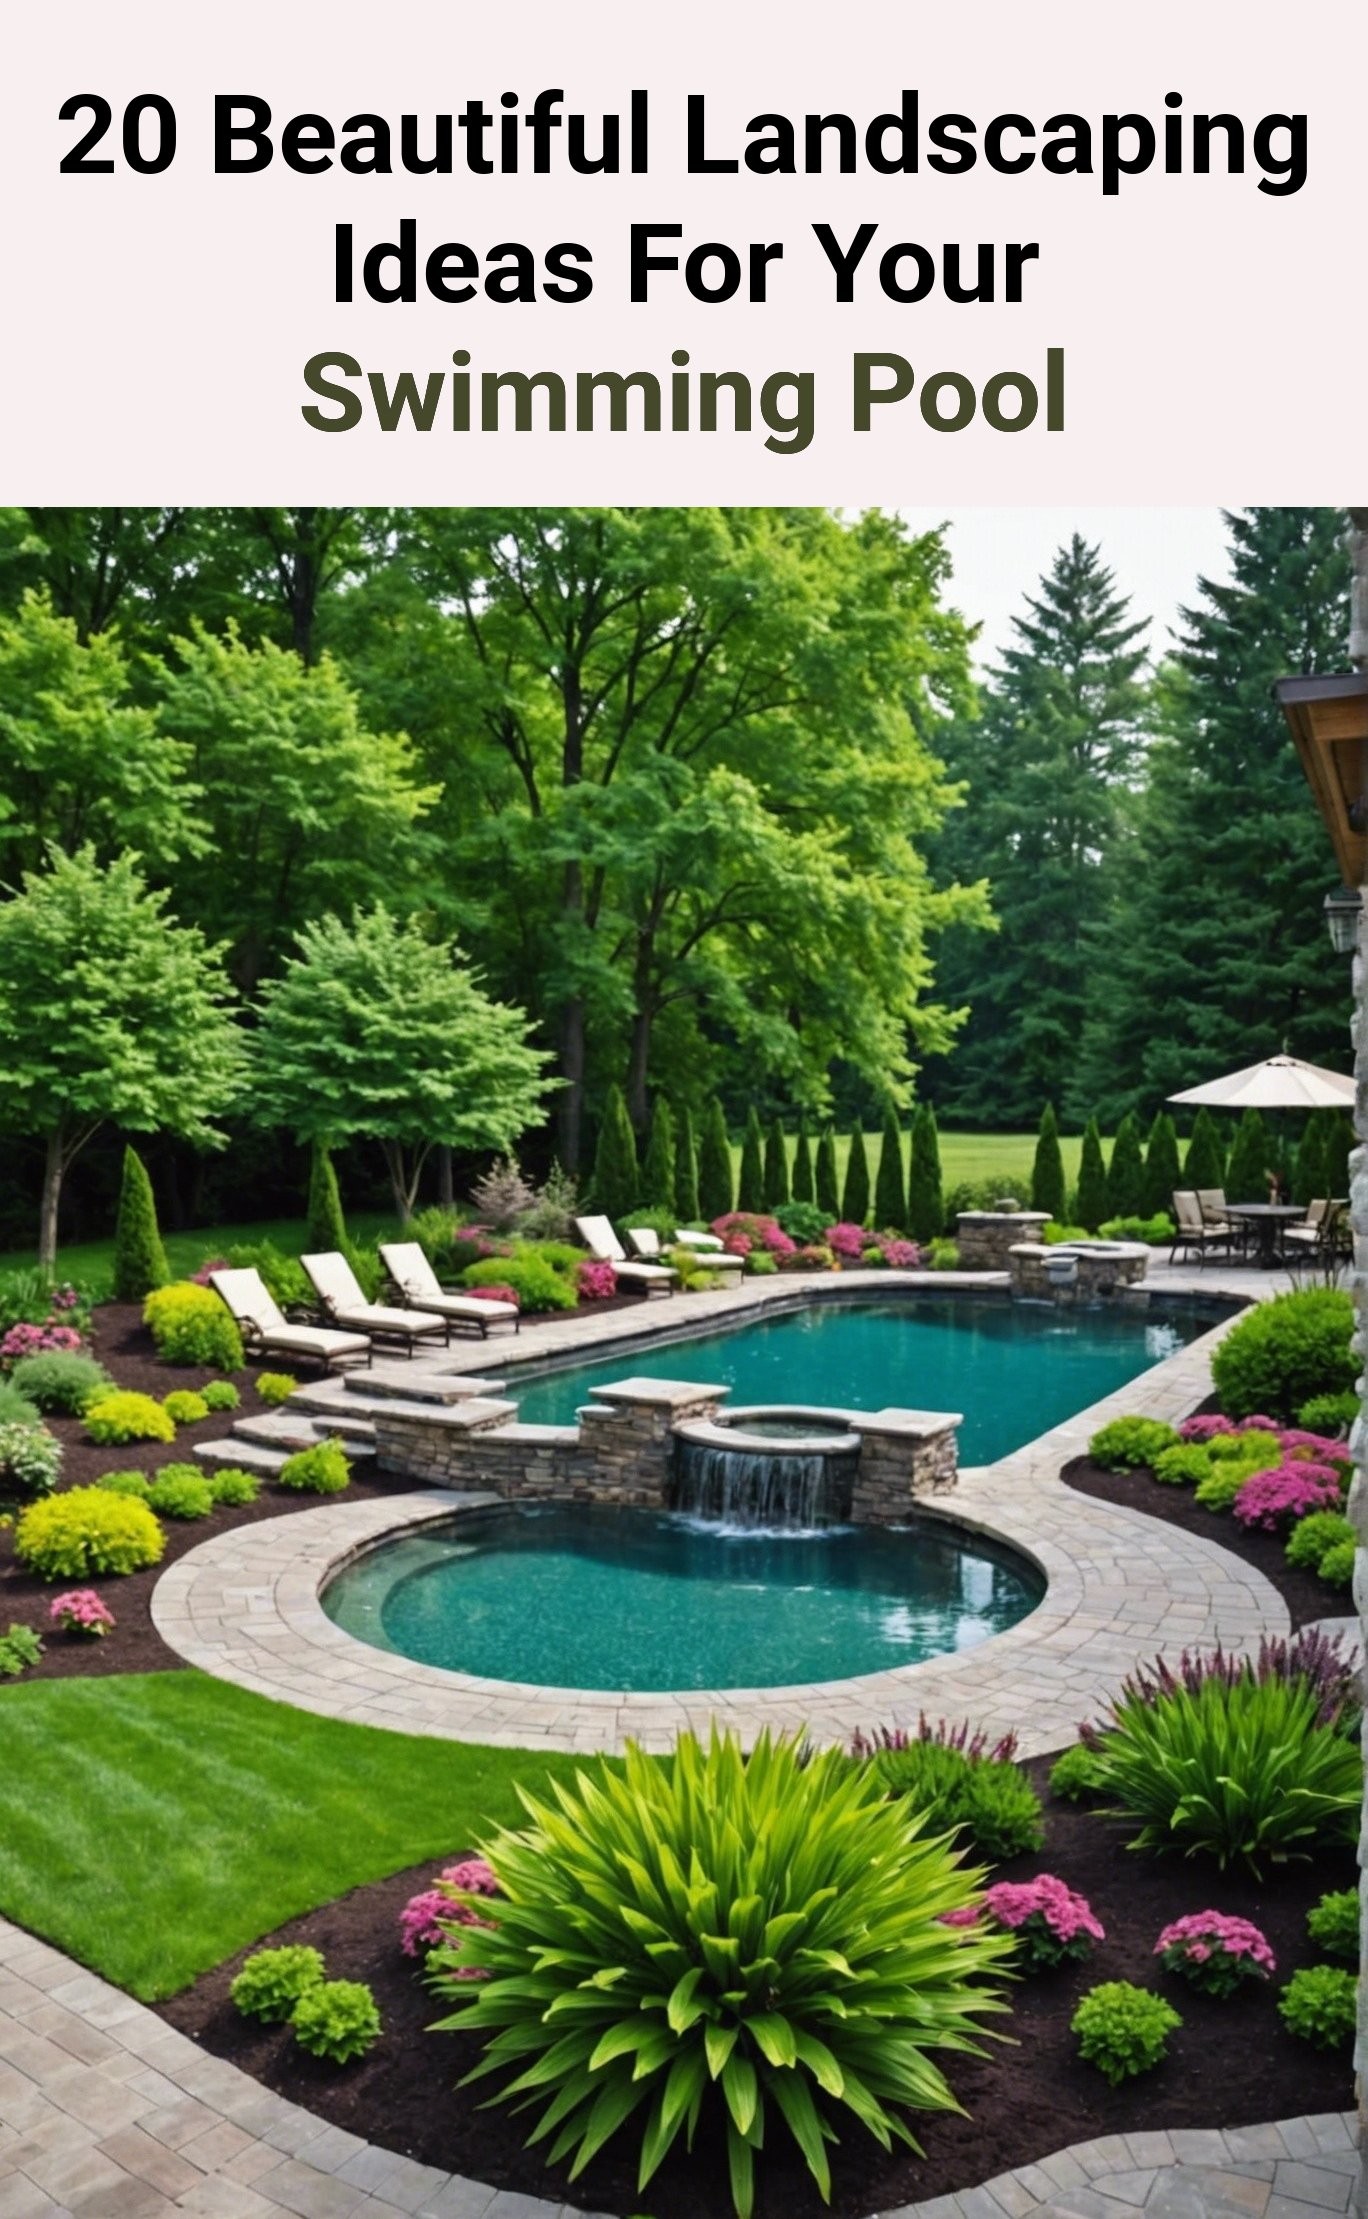 20 Beautiful Landscaping Ideas For Your Swimming Pool